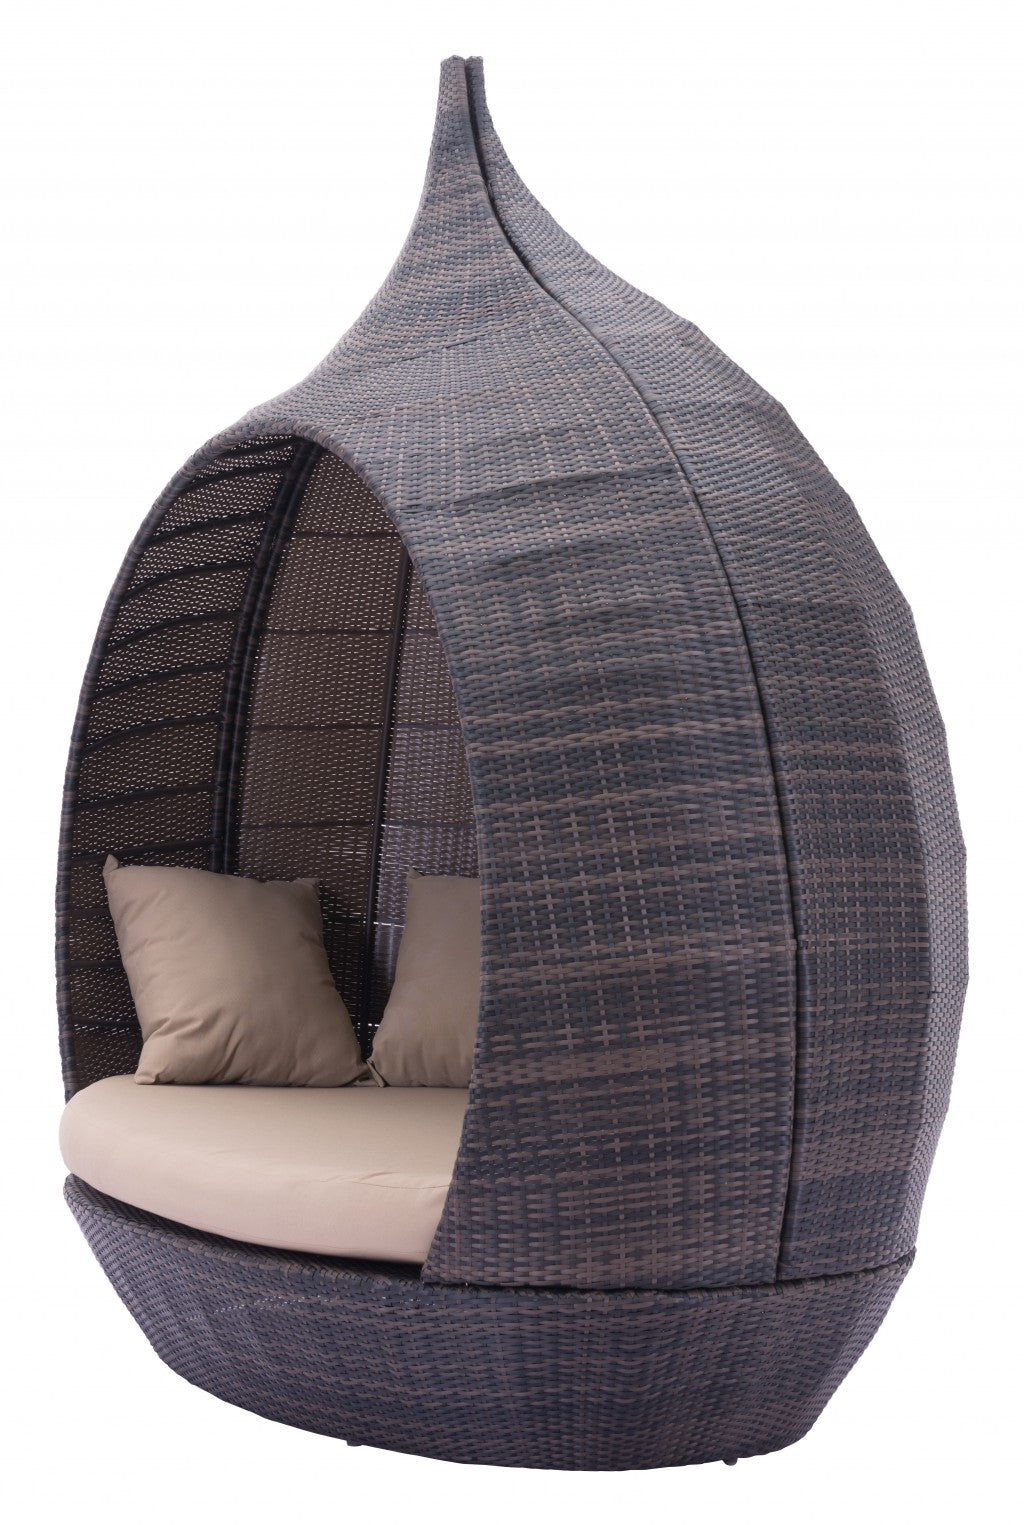 Teardrop Shaped Brown And Beige Daybed - life of kuhl @HOME